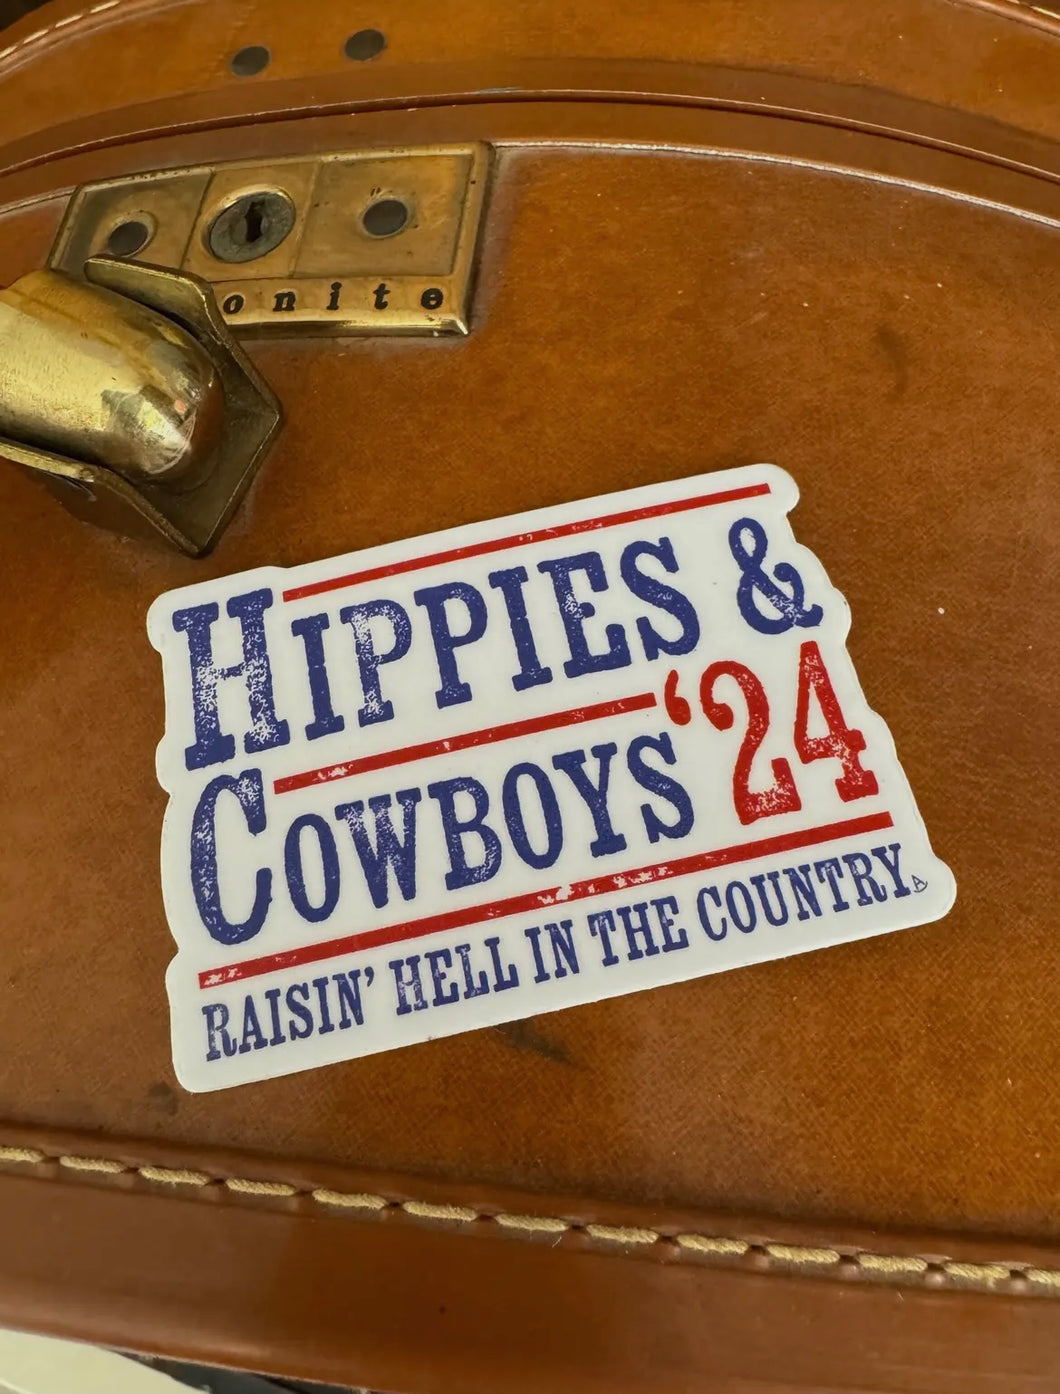 Hippies & Cowboys ‘24 Decal